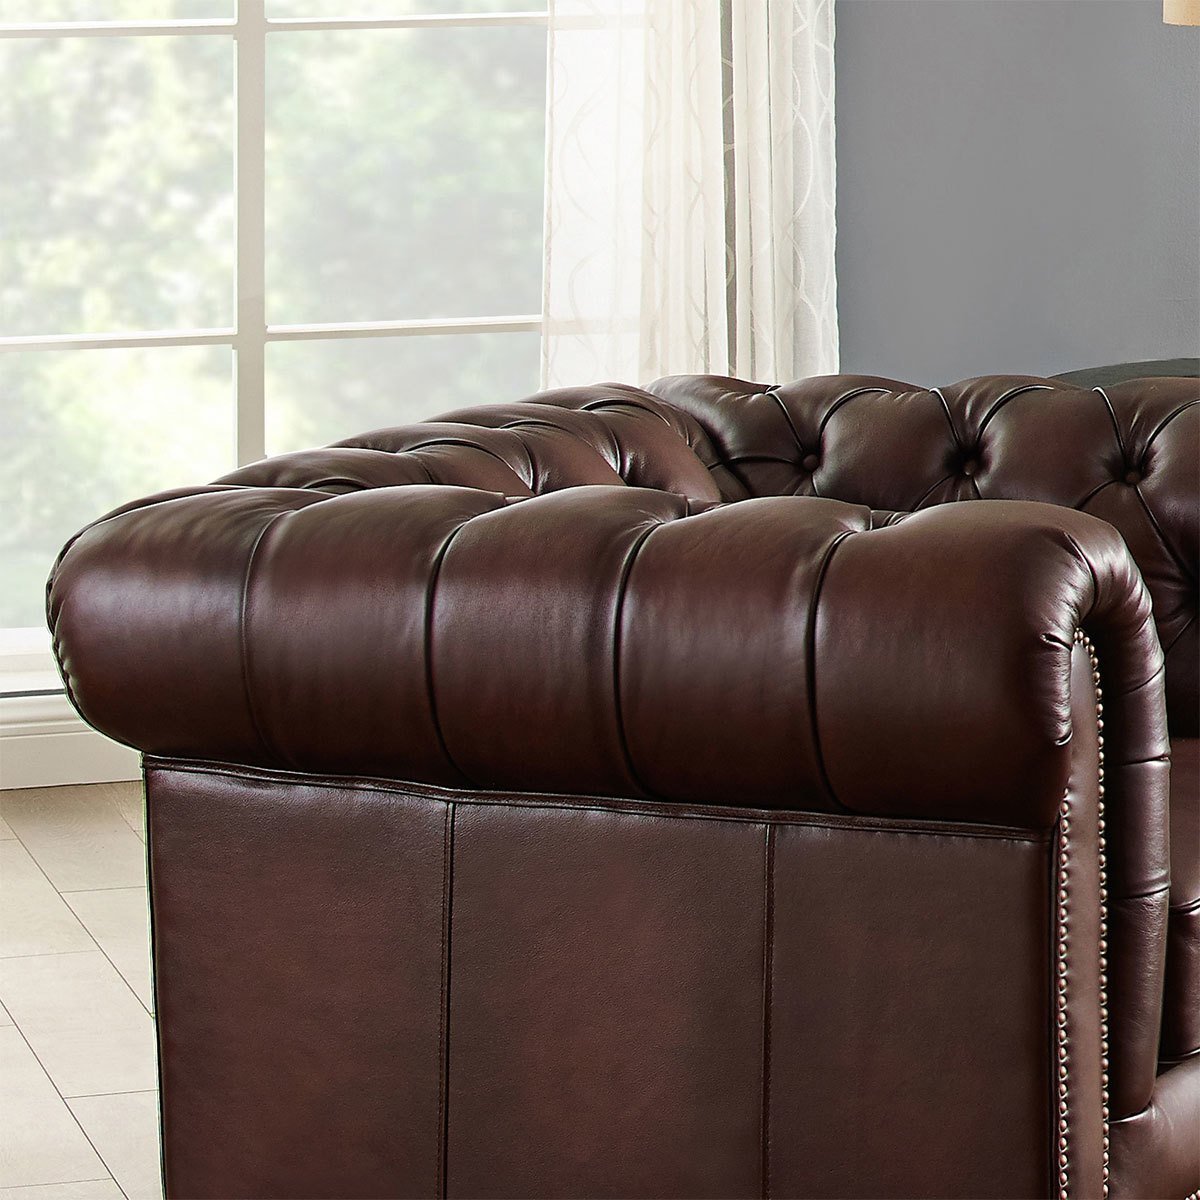 Allington Brown Leather Chesterfield Armchair - Signature Retail Stores